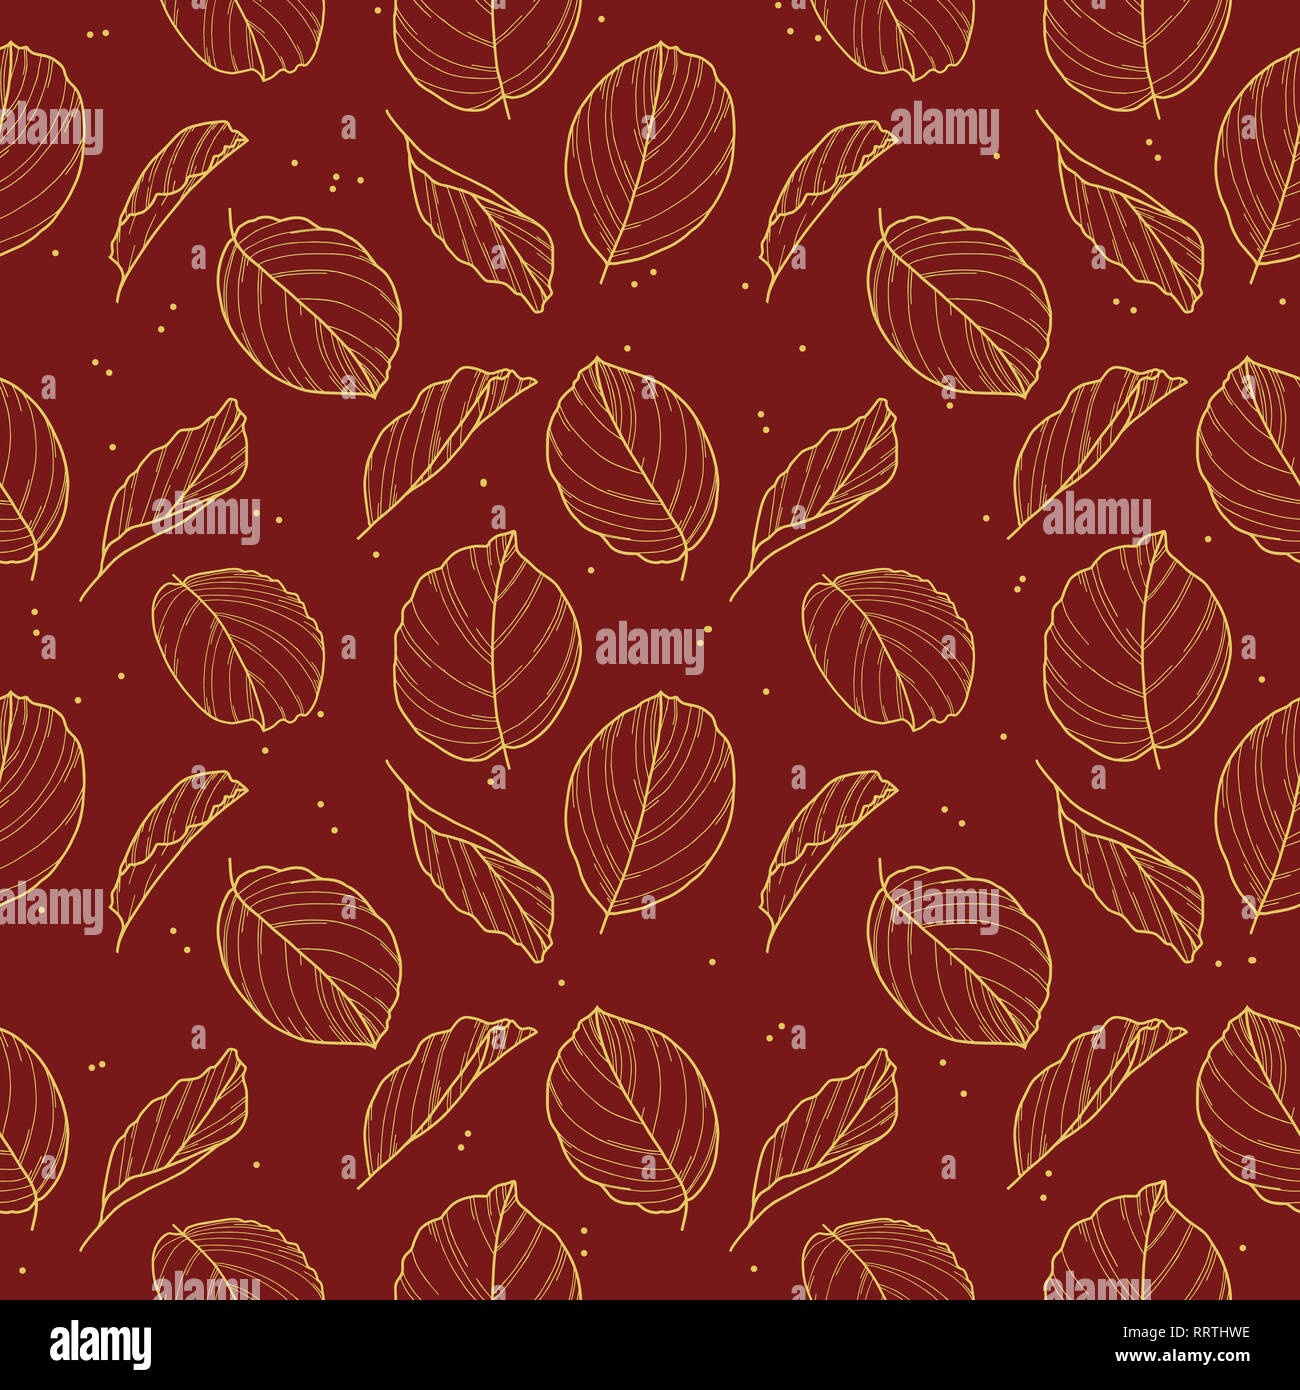 Elegant seamless pattern with drawn gold Calathea Prayer Plant leaves outlines in gold color on dark red background Stock Photo